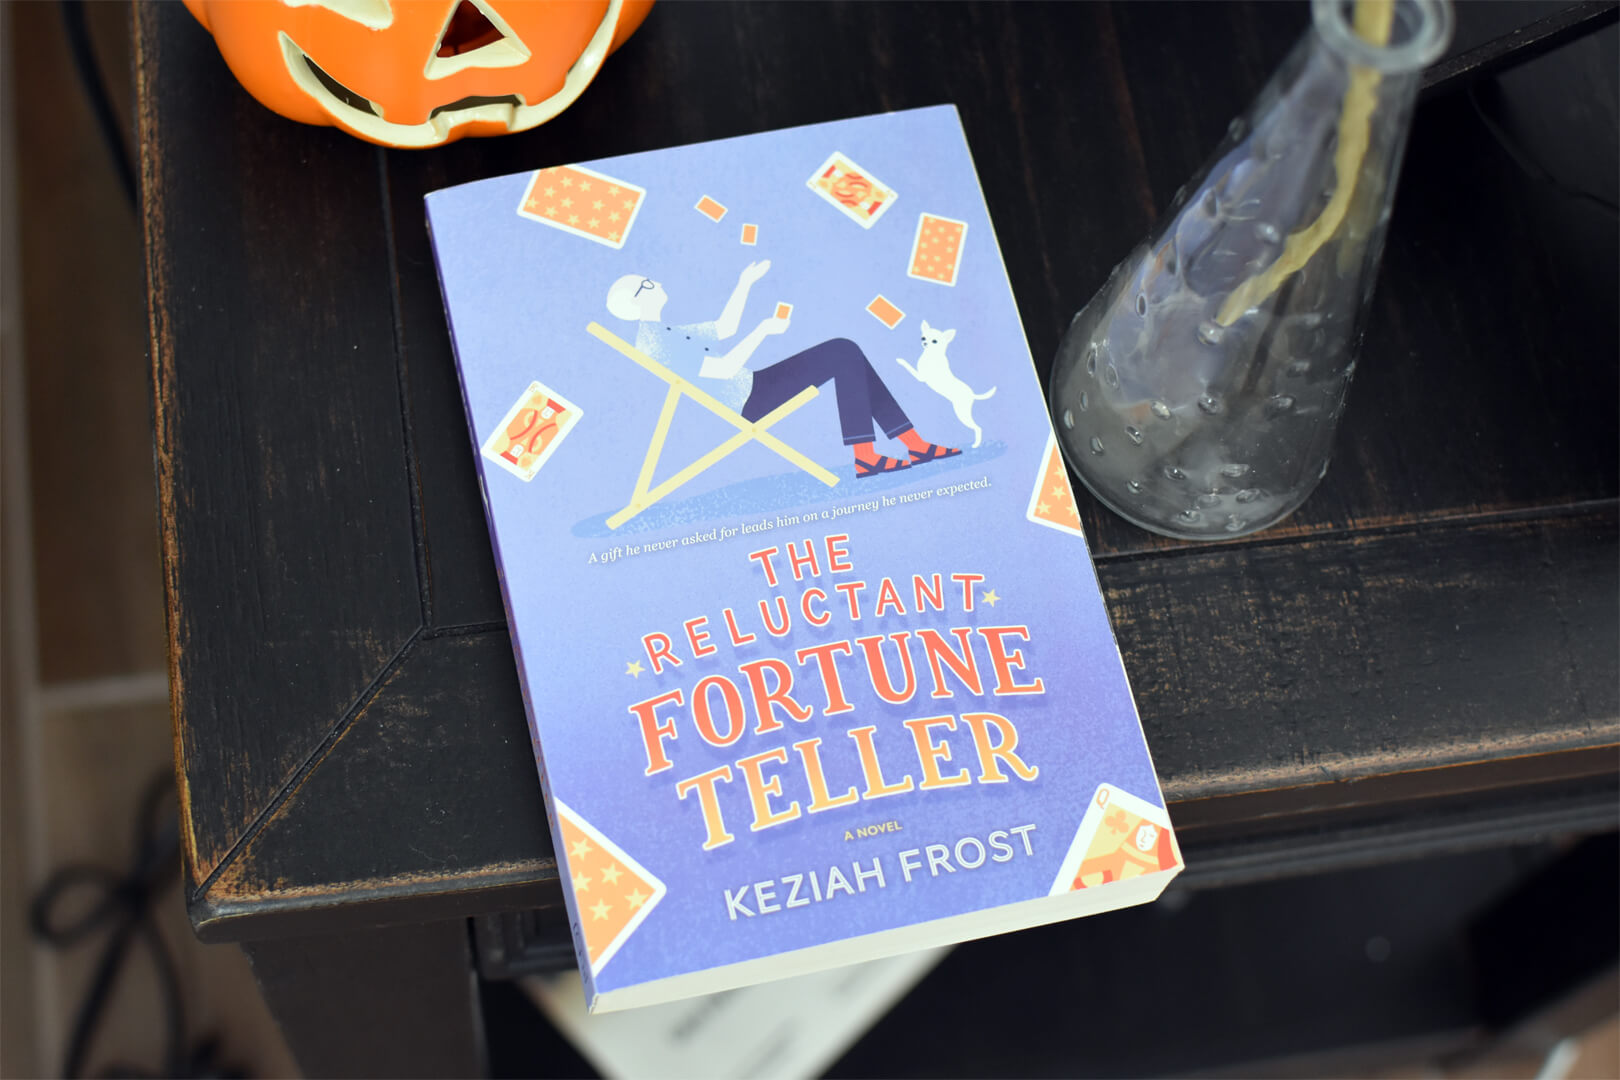 Preview: The Reluctant Fortune-Teller by Keziah Frost